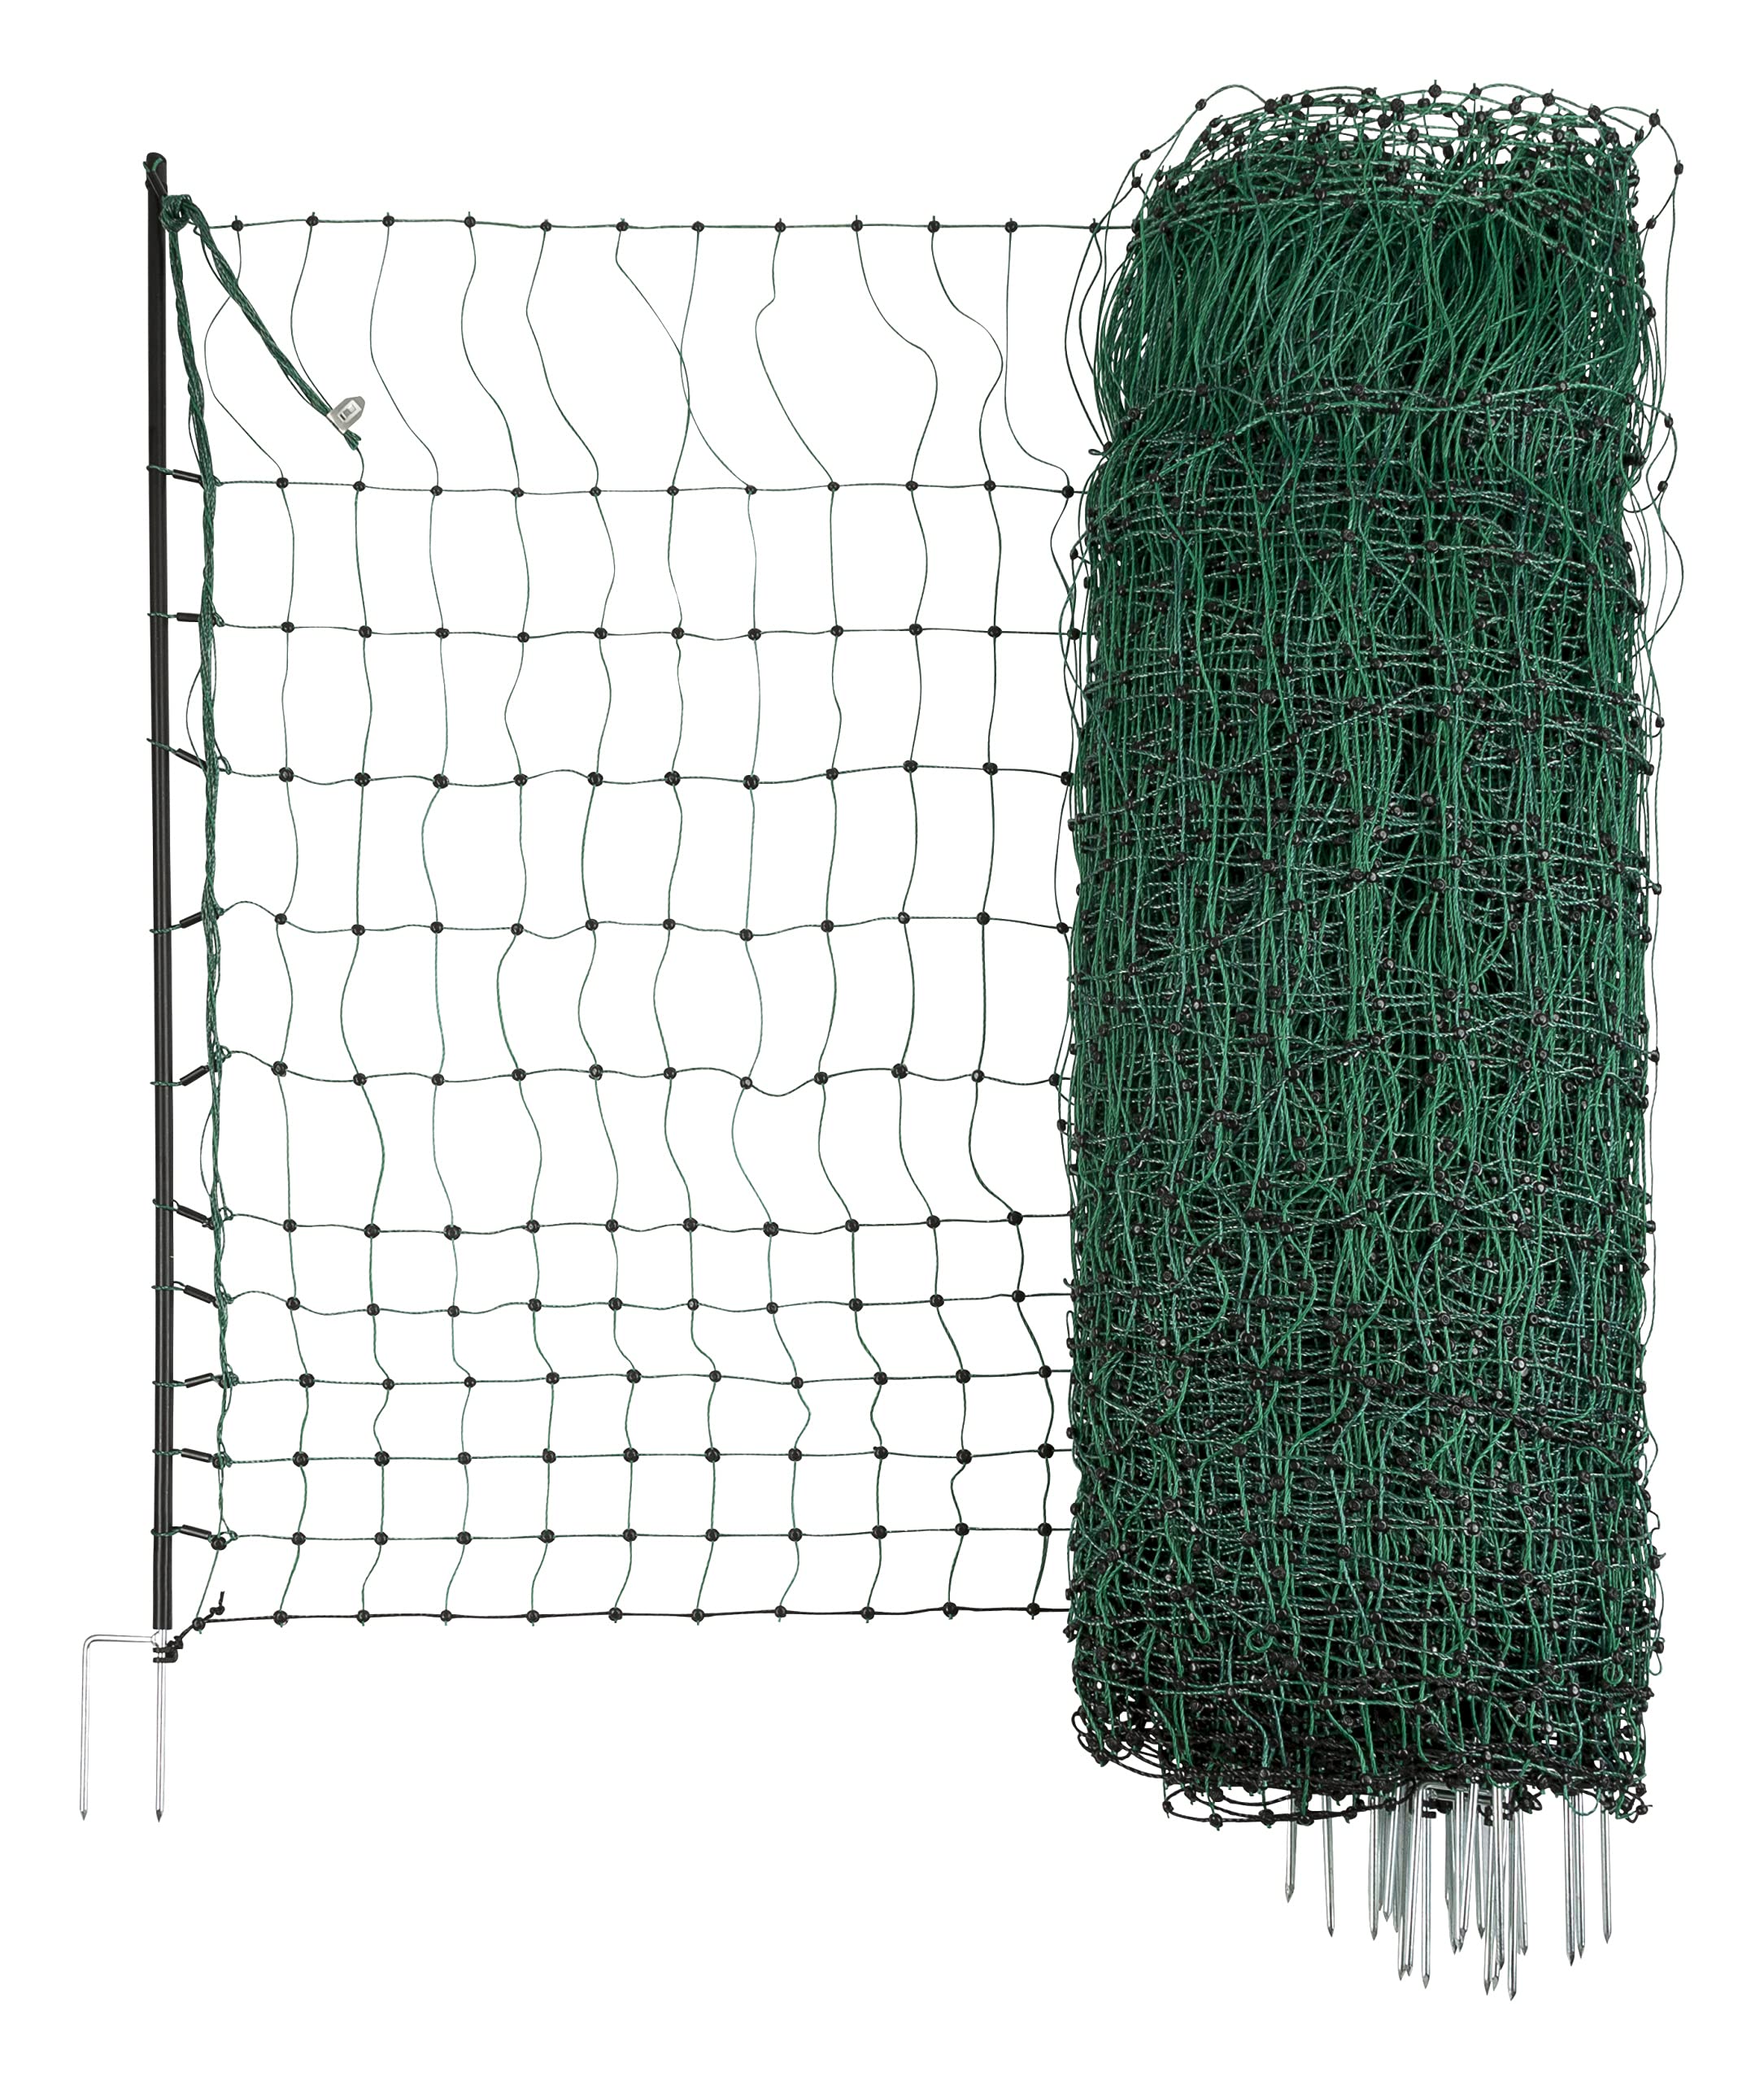 Kerbl Poultry Net (50 m, Height 106 cm, Non-Electrical, Reinforced Top Strand, 15 Plastic Stakes, Double Bottom Tip) 292278